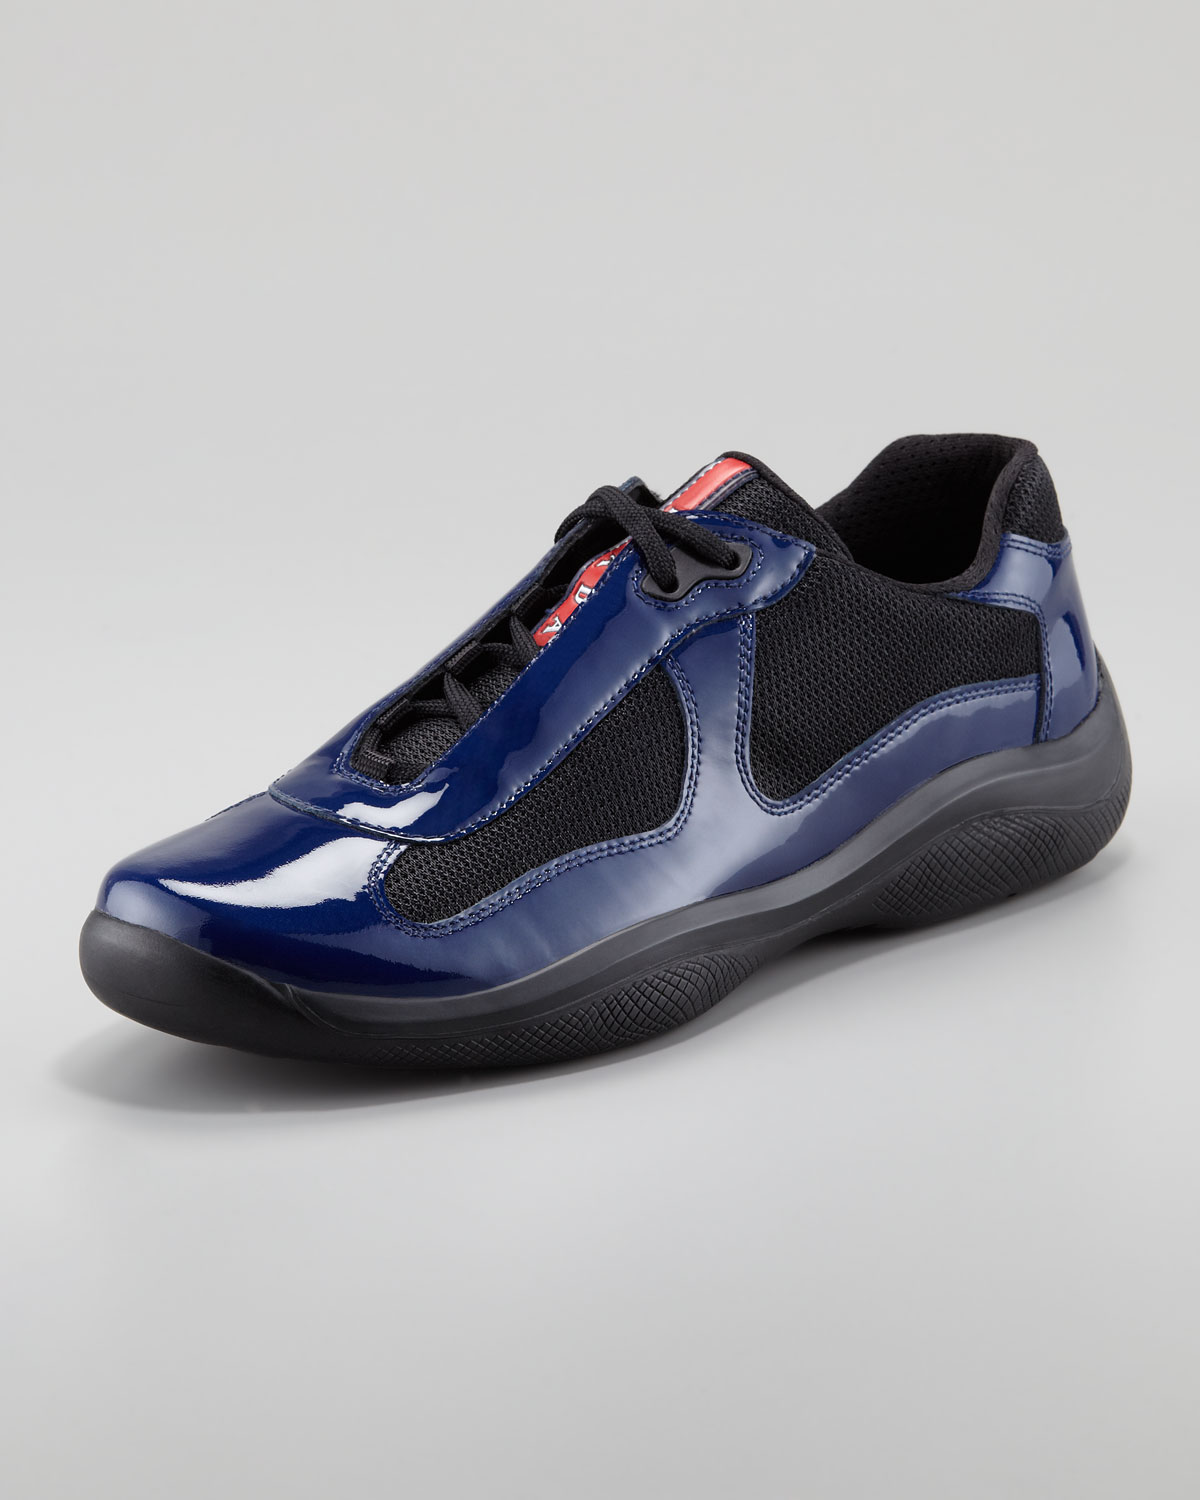 Lyst - Prada Americas Cup Patent Leather Sneaker in Blue for Men